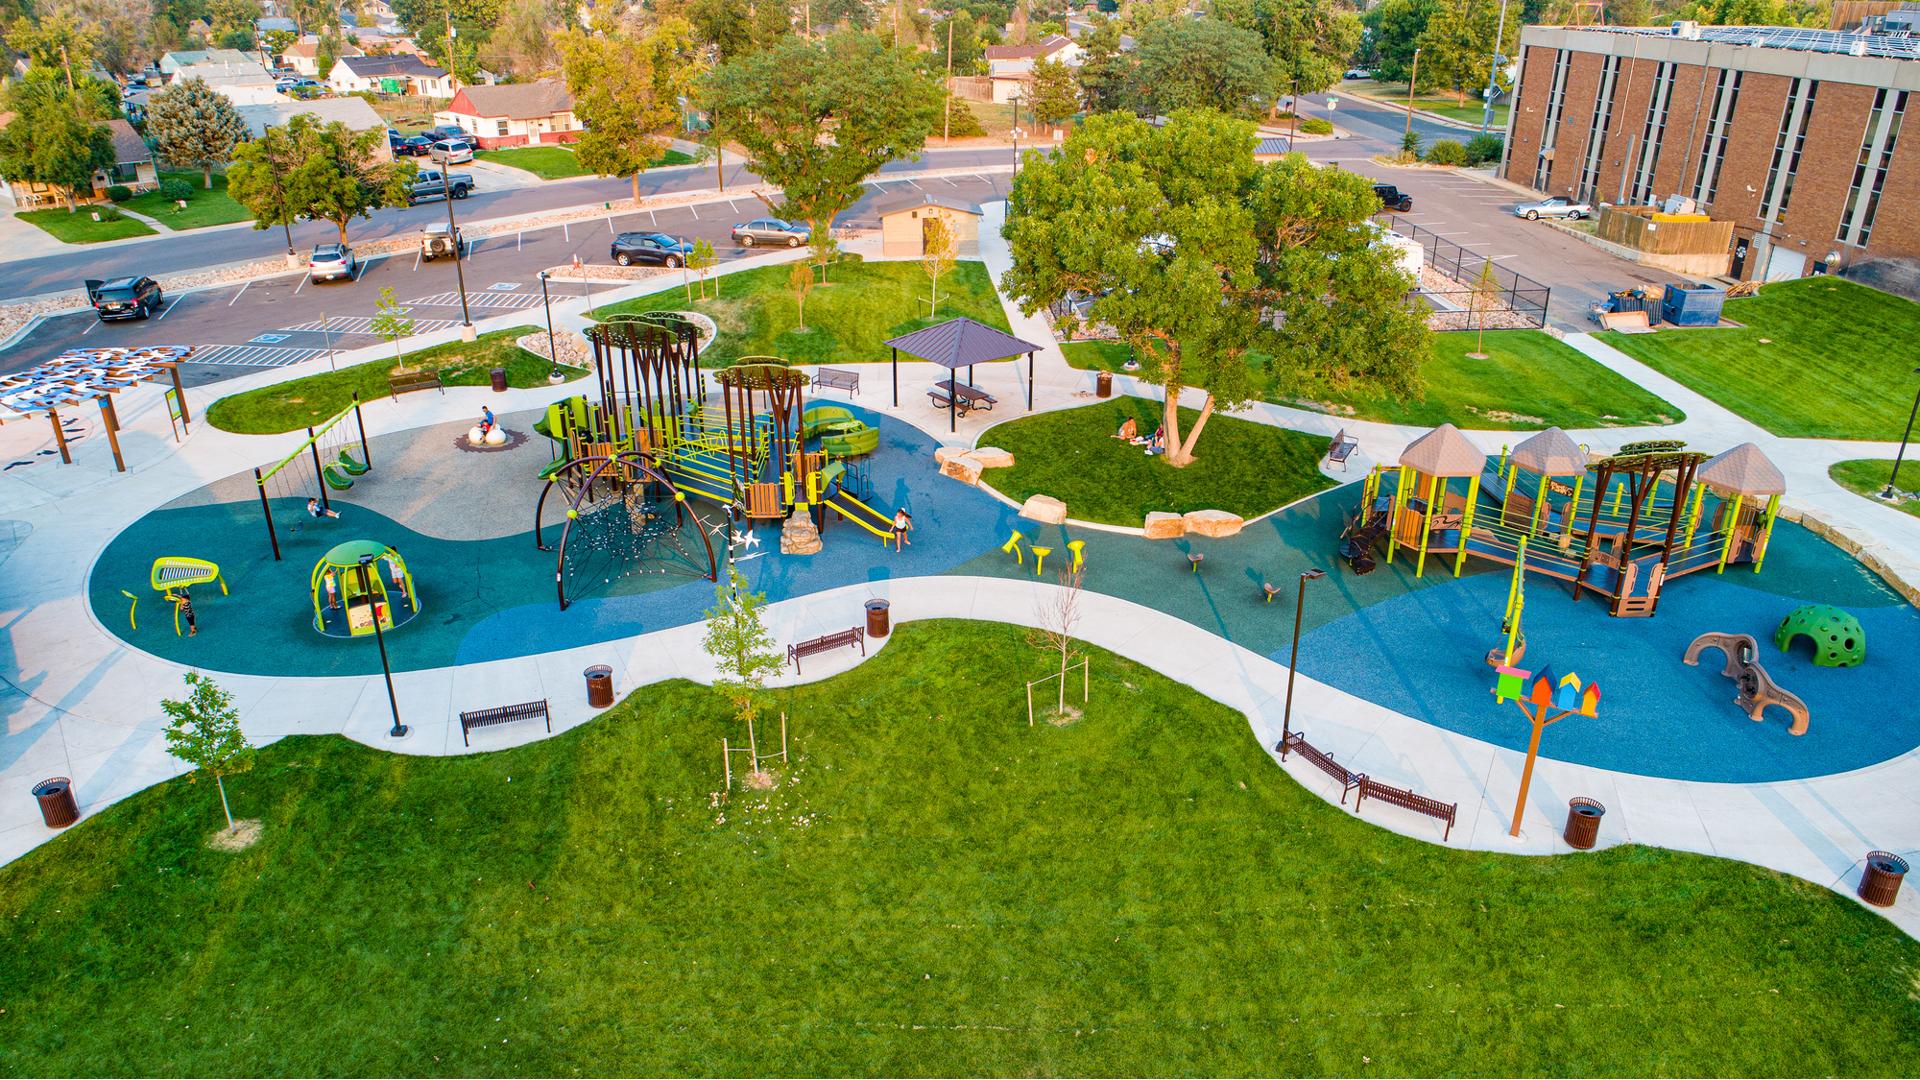 Full elevated view of a large inclusive play area with two separate nature themed play structures surrounded by additional play activities like swing sets, climbers, and outdoor musical instruments.